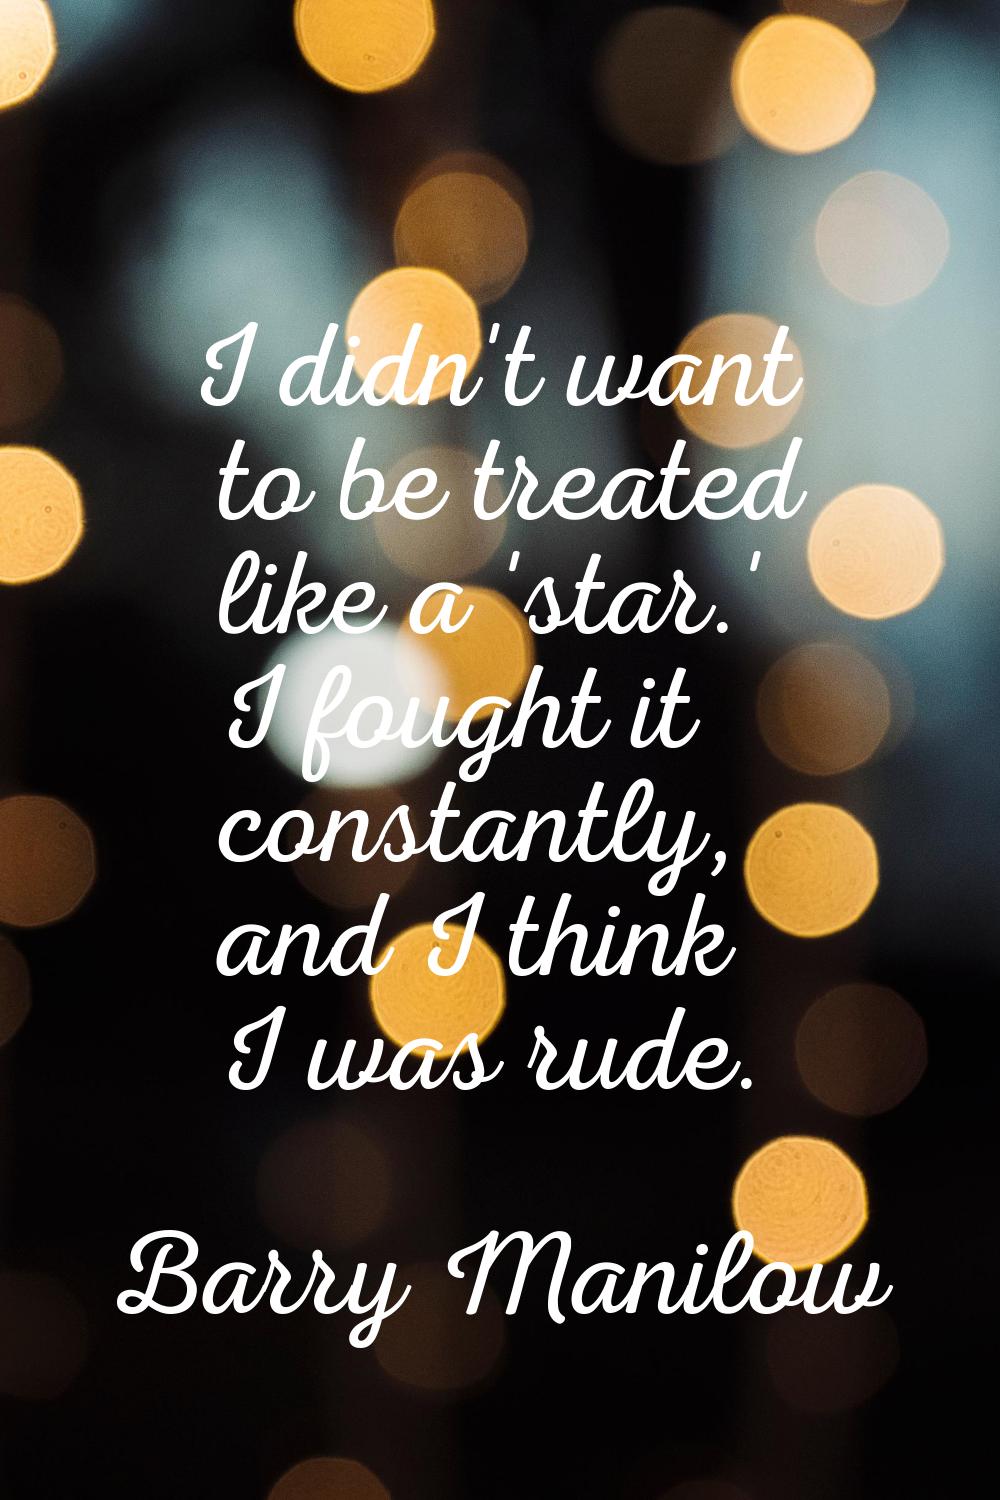 I didn't want to be treated like a 'star.' I fought it constantly, and I think I was rude.